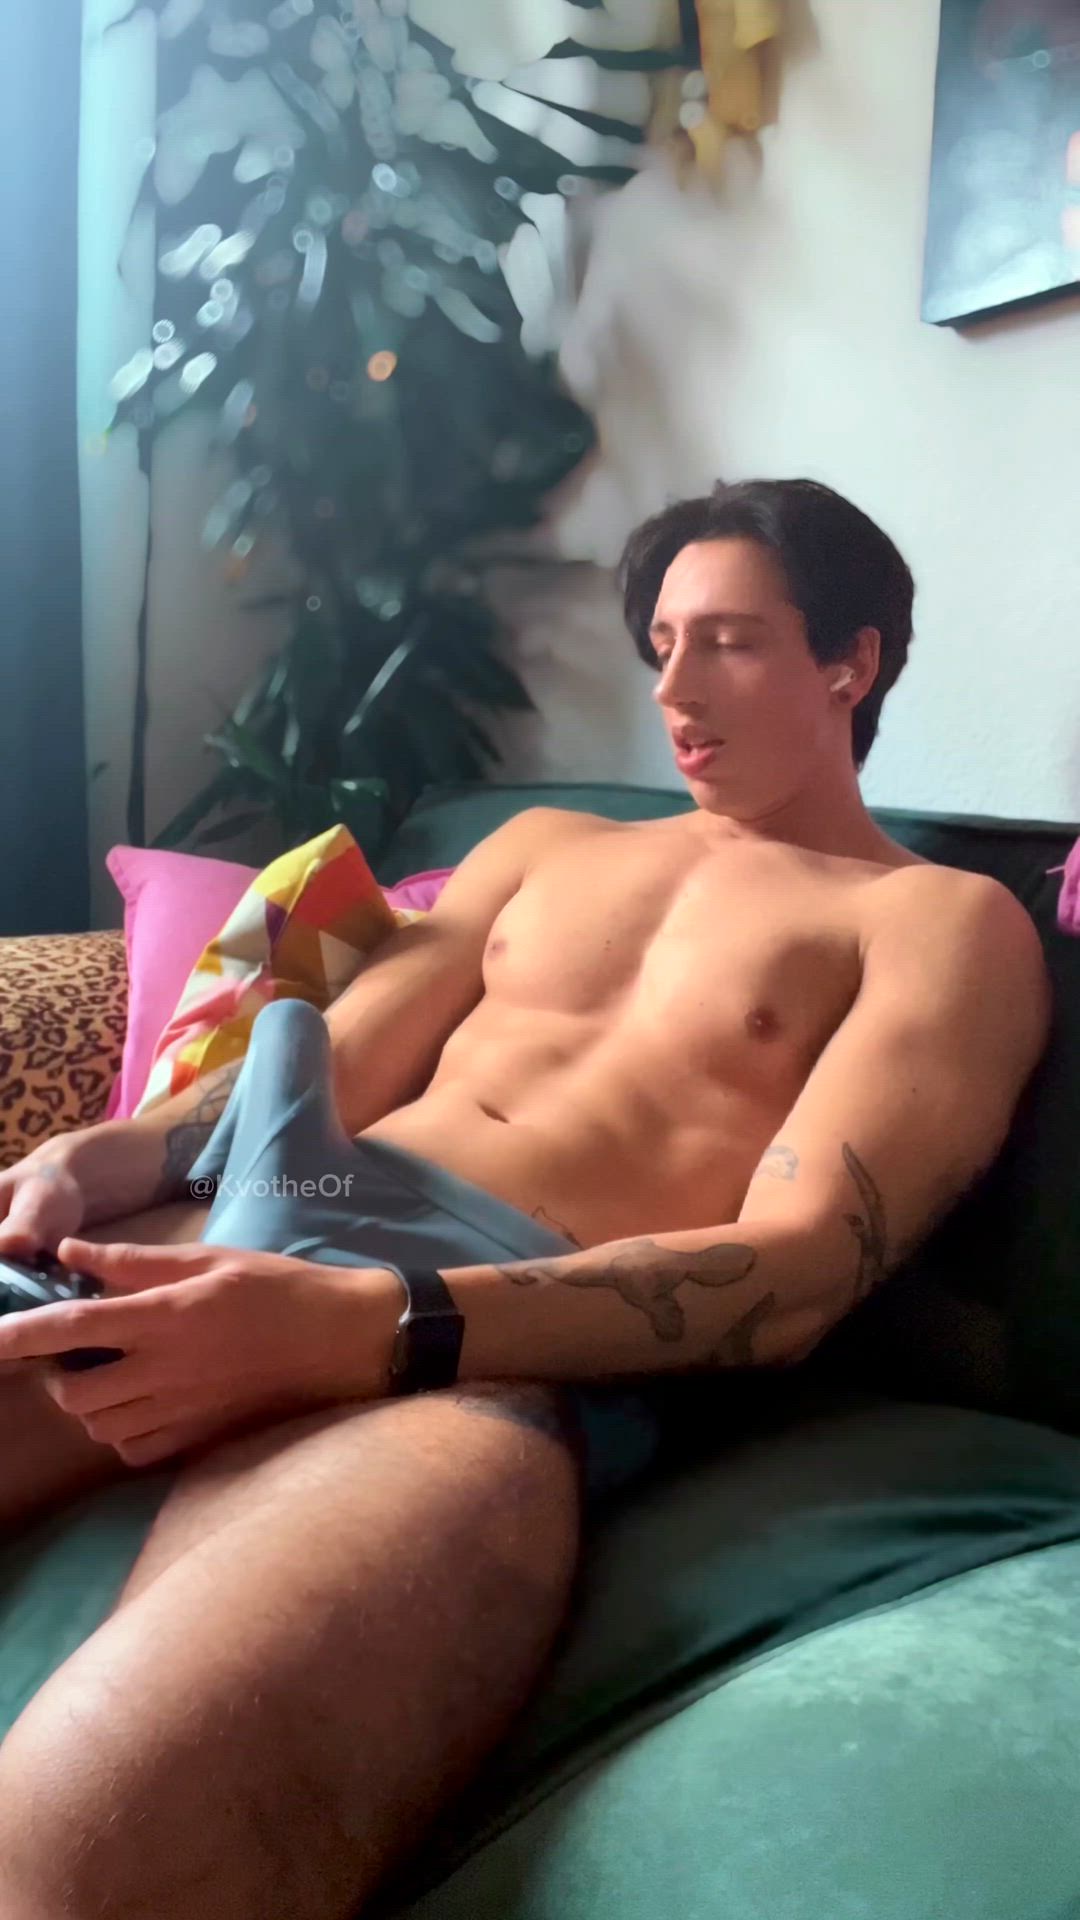 Big Dick porn video with onlyfans model Kvothe <strong>@kvotheof</strong>